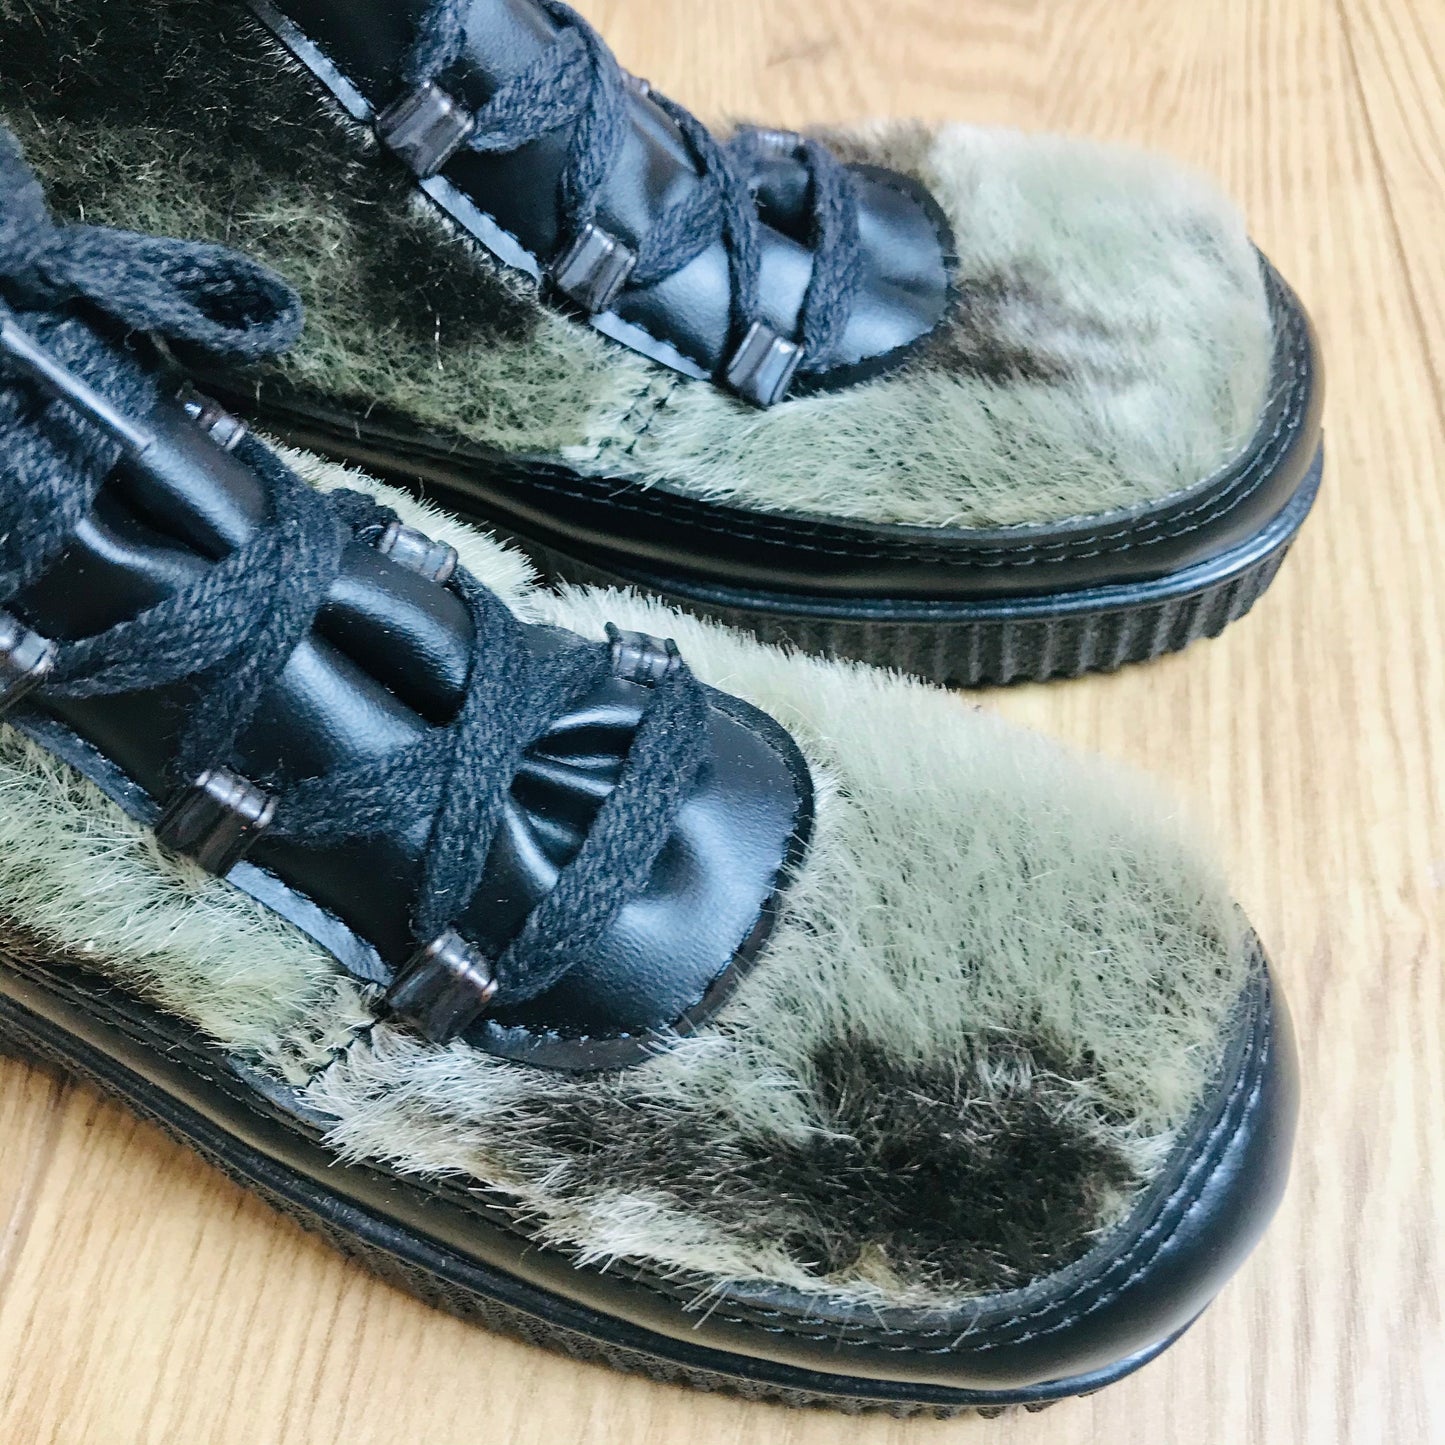 Deadstock 1970's /80's Children's Cosy Vegan Furry Lined Low Boots  Made in Italy  EU 29-31-32